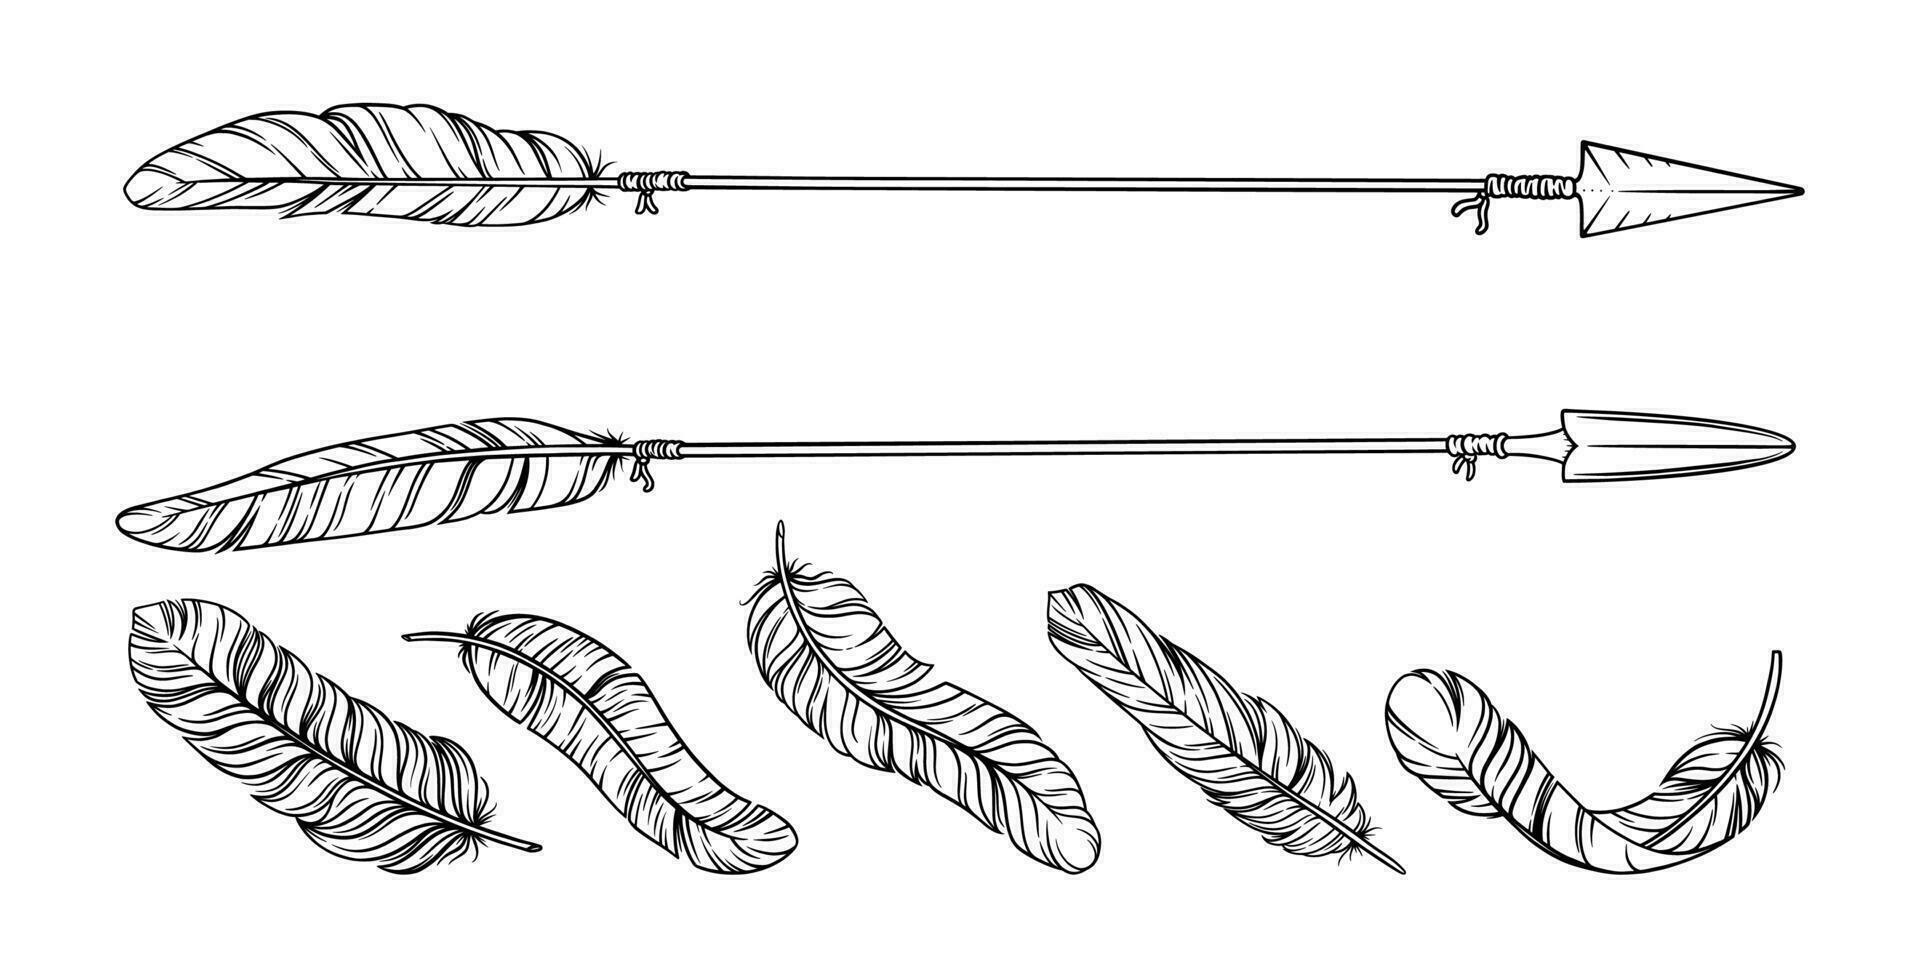 Arrow with tribal feathers. Decorative boho indian arrowheads and feathers. Native aztec or hipster tattoo sketch vector